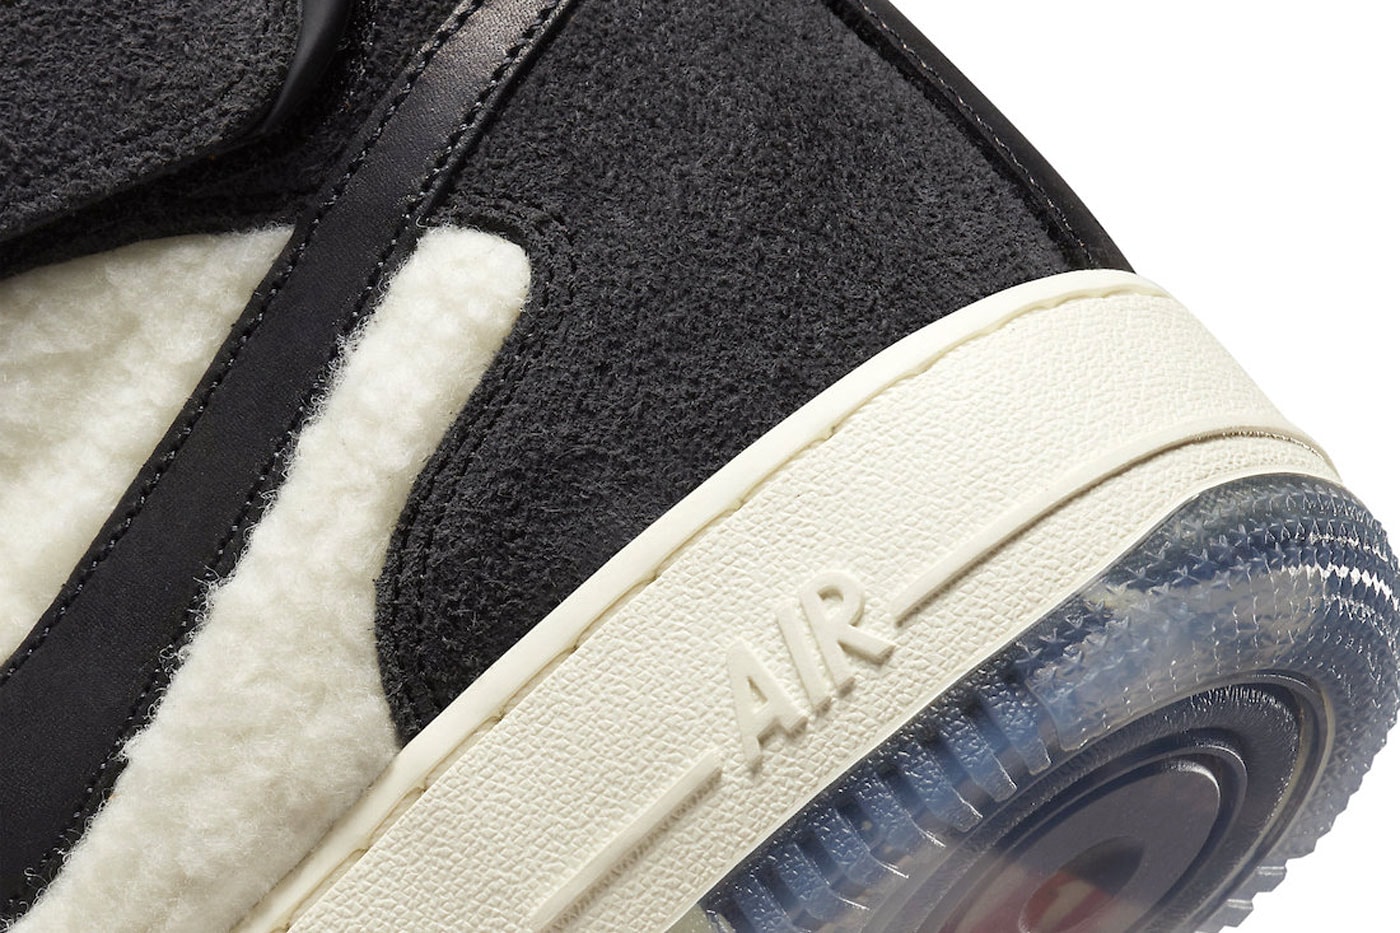 Official Look at Nike Air Force 1 Mid Culture Day Panda White Black fleece furry fuzzy suede rug 